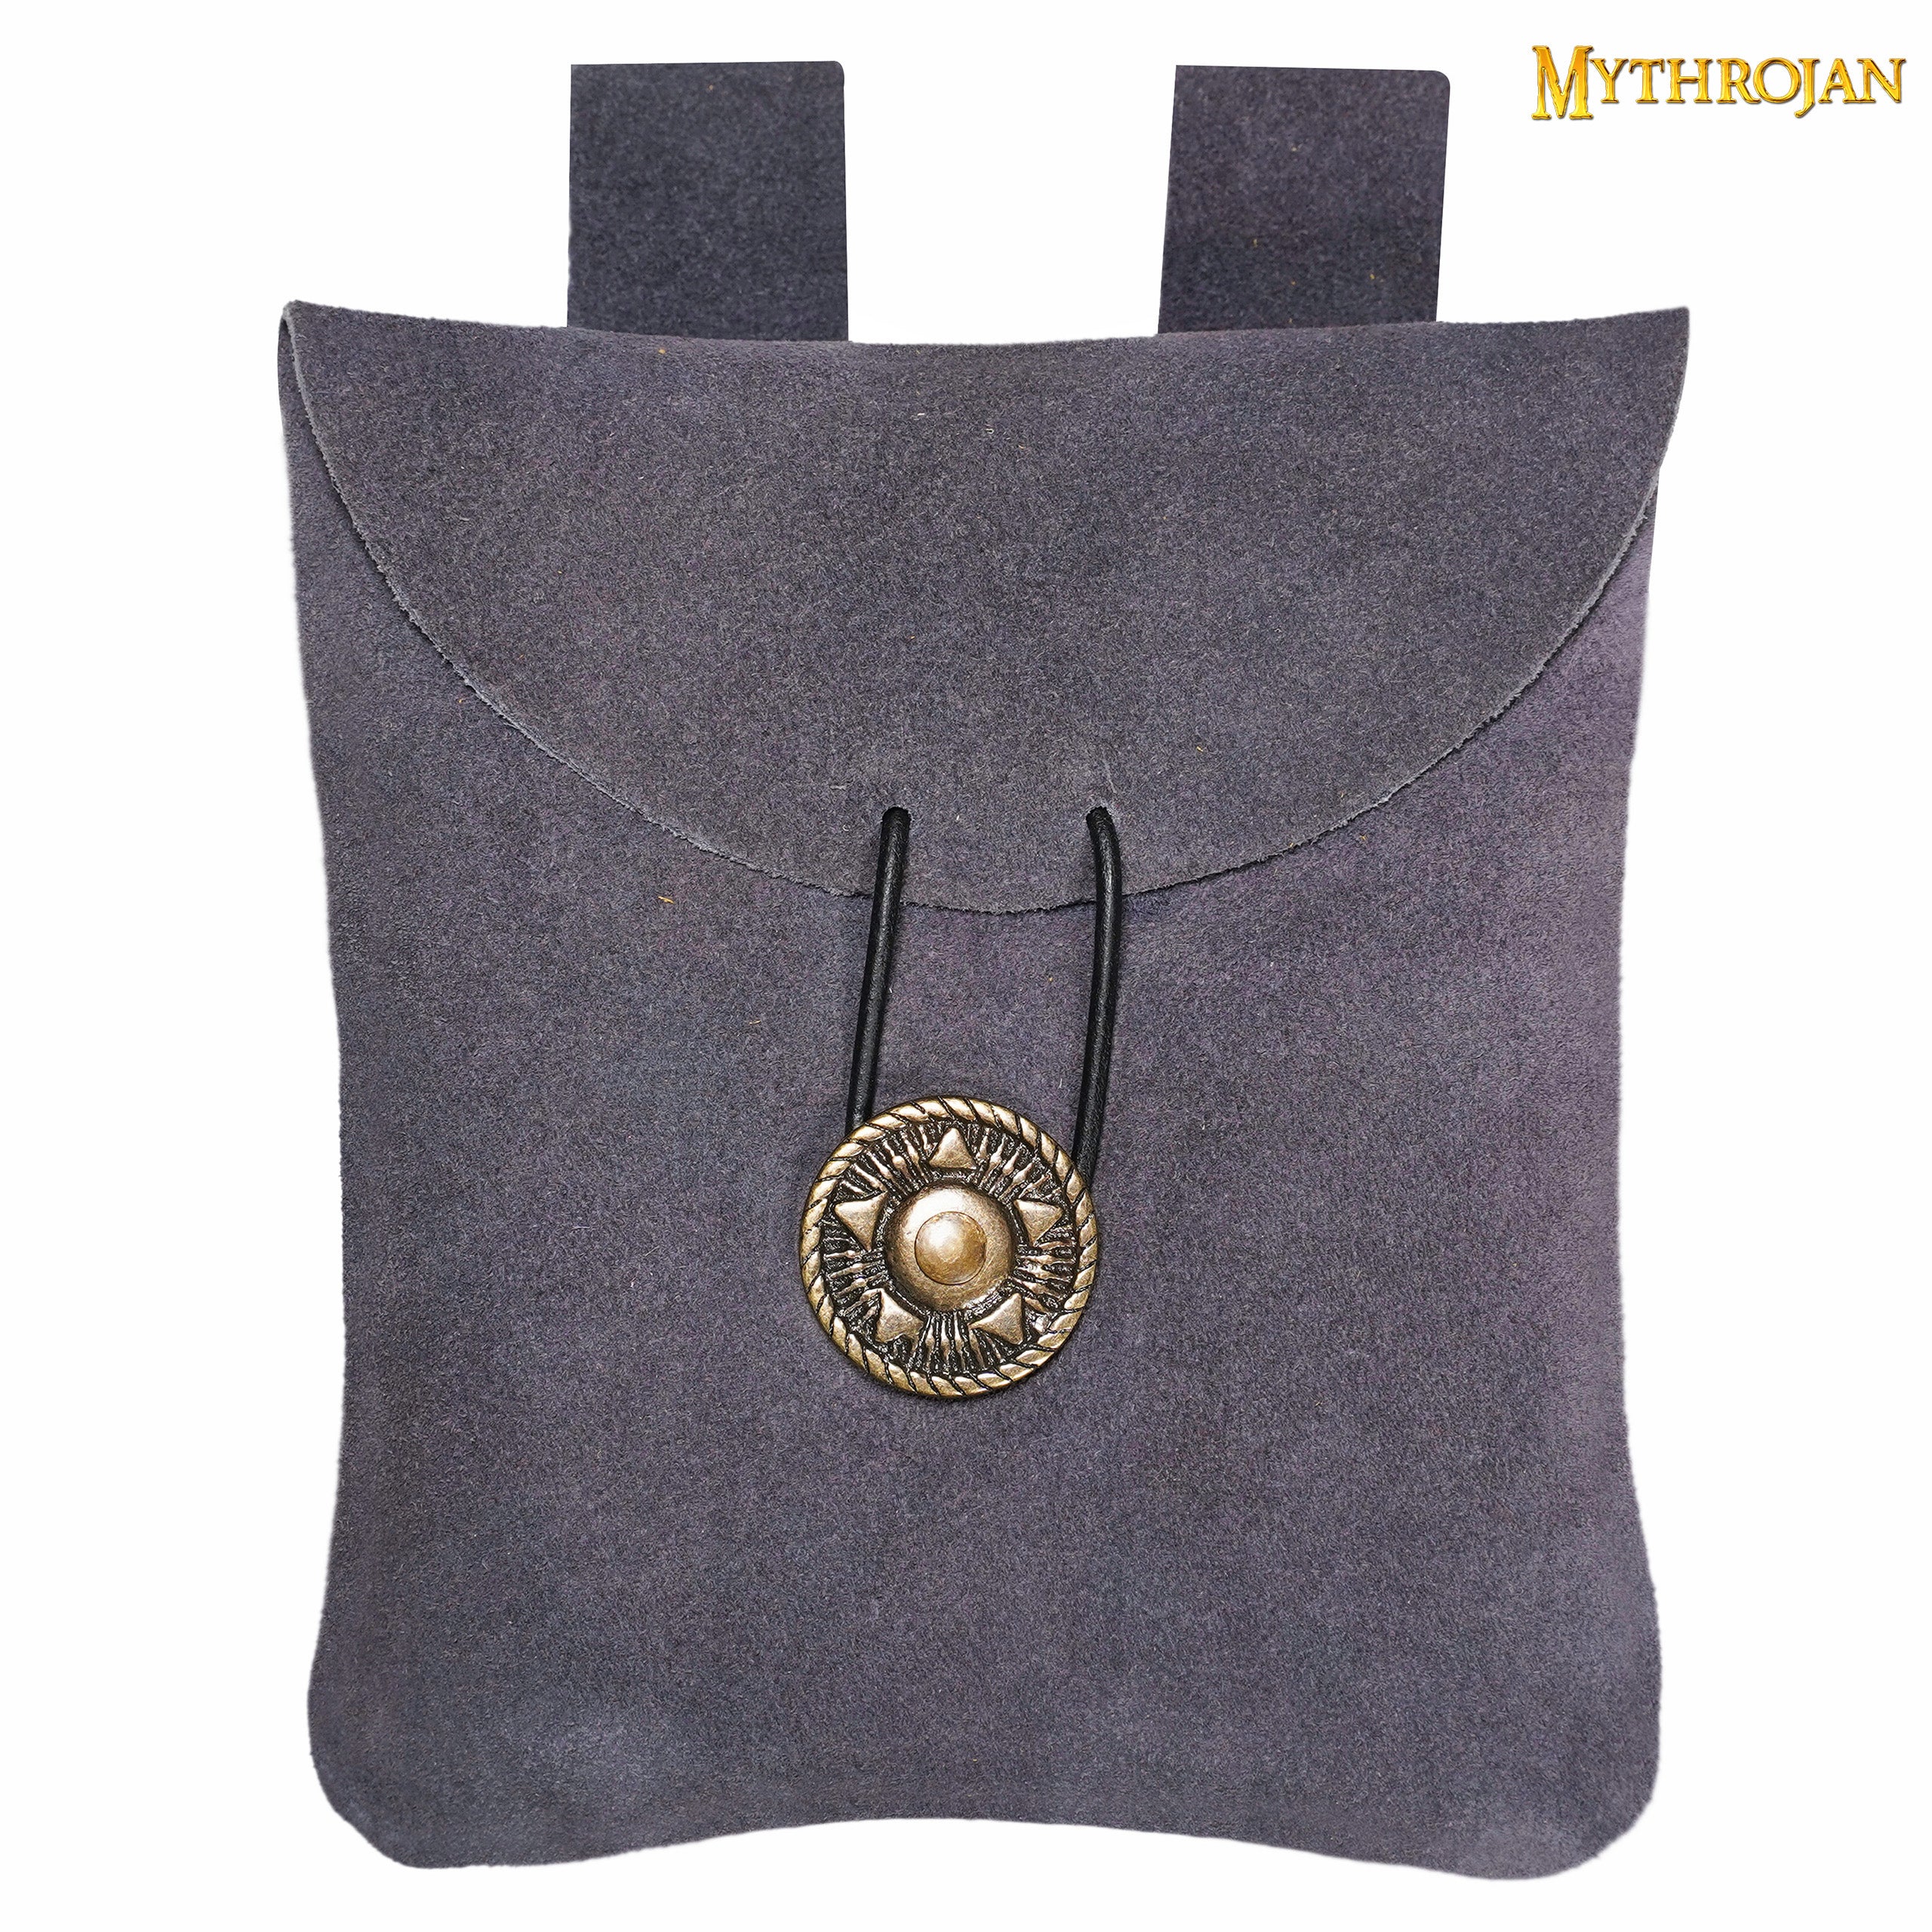 Purple suede leather medieval pouch